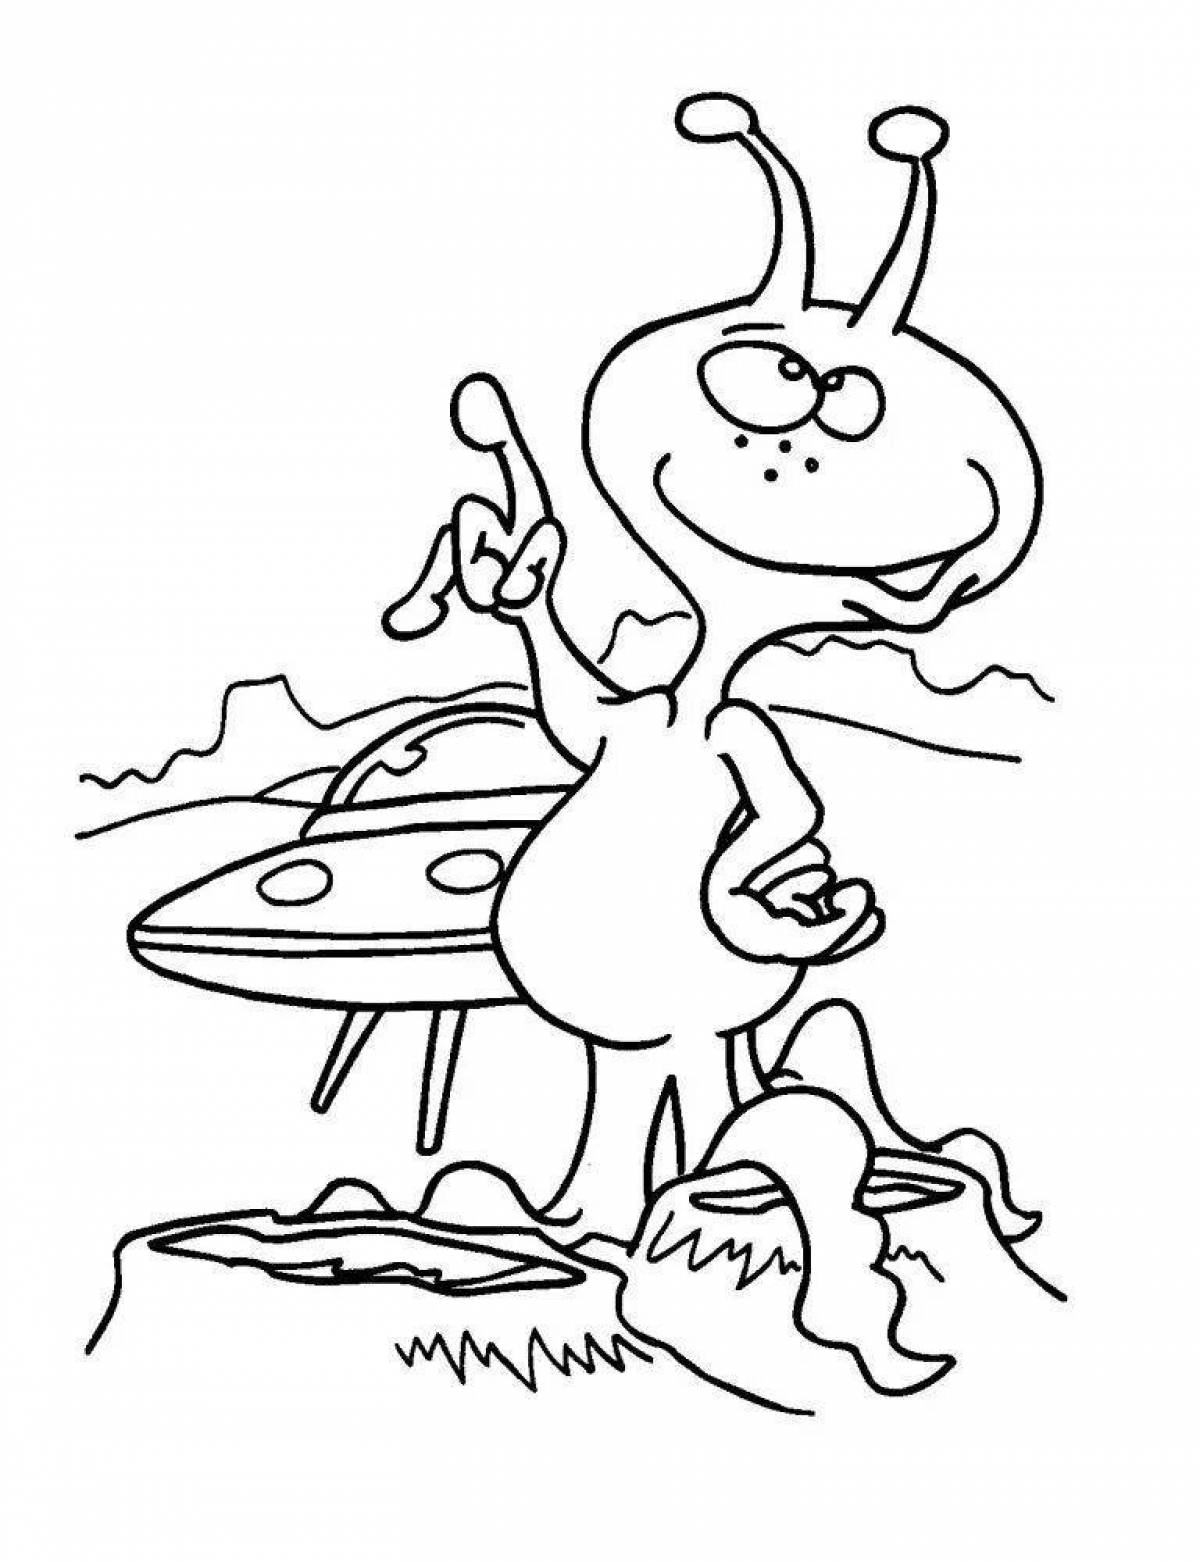 Otherworldly coloring pages aliens